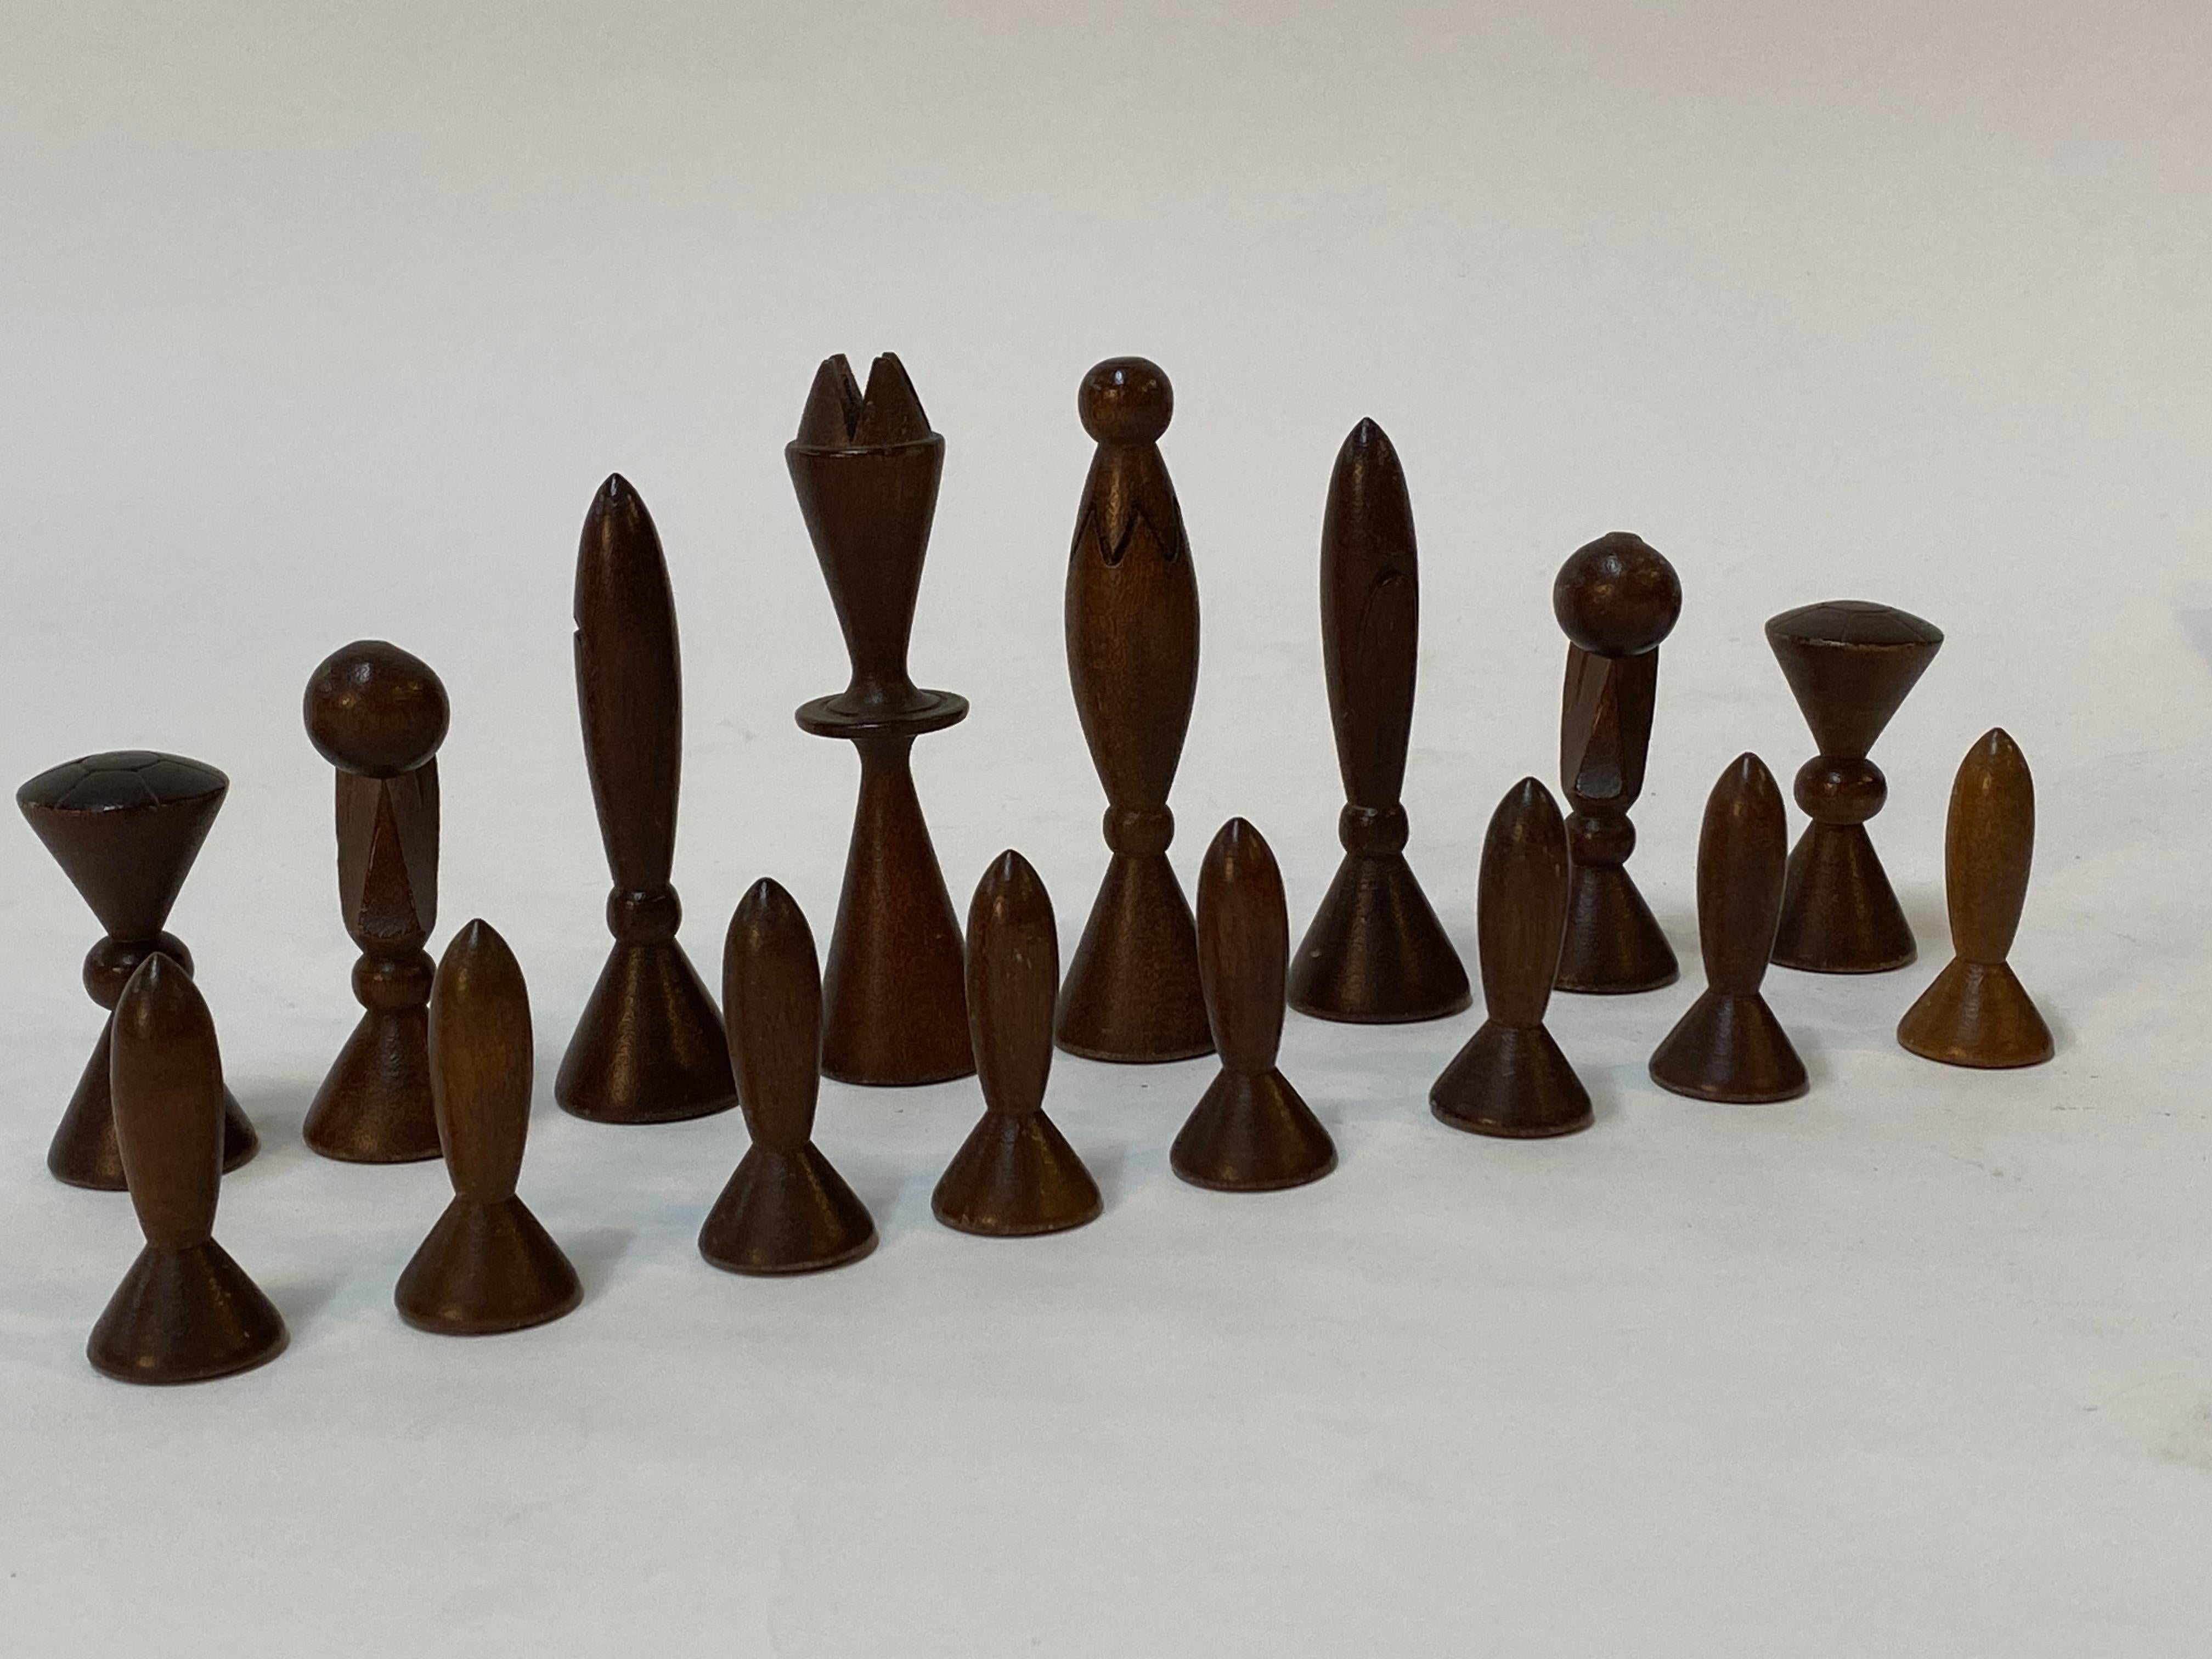 Modernist Boxed Wood Chess Pieces In Good Condition For Sale In Garnerville, NY